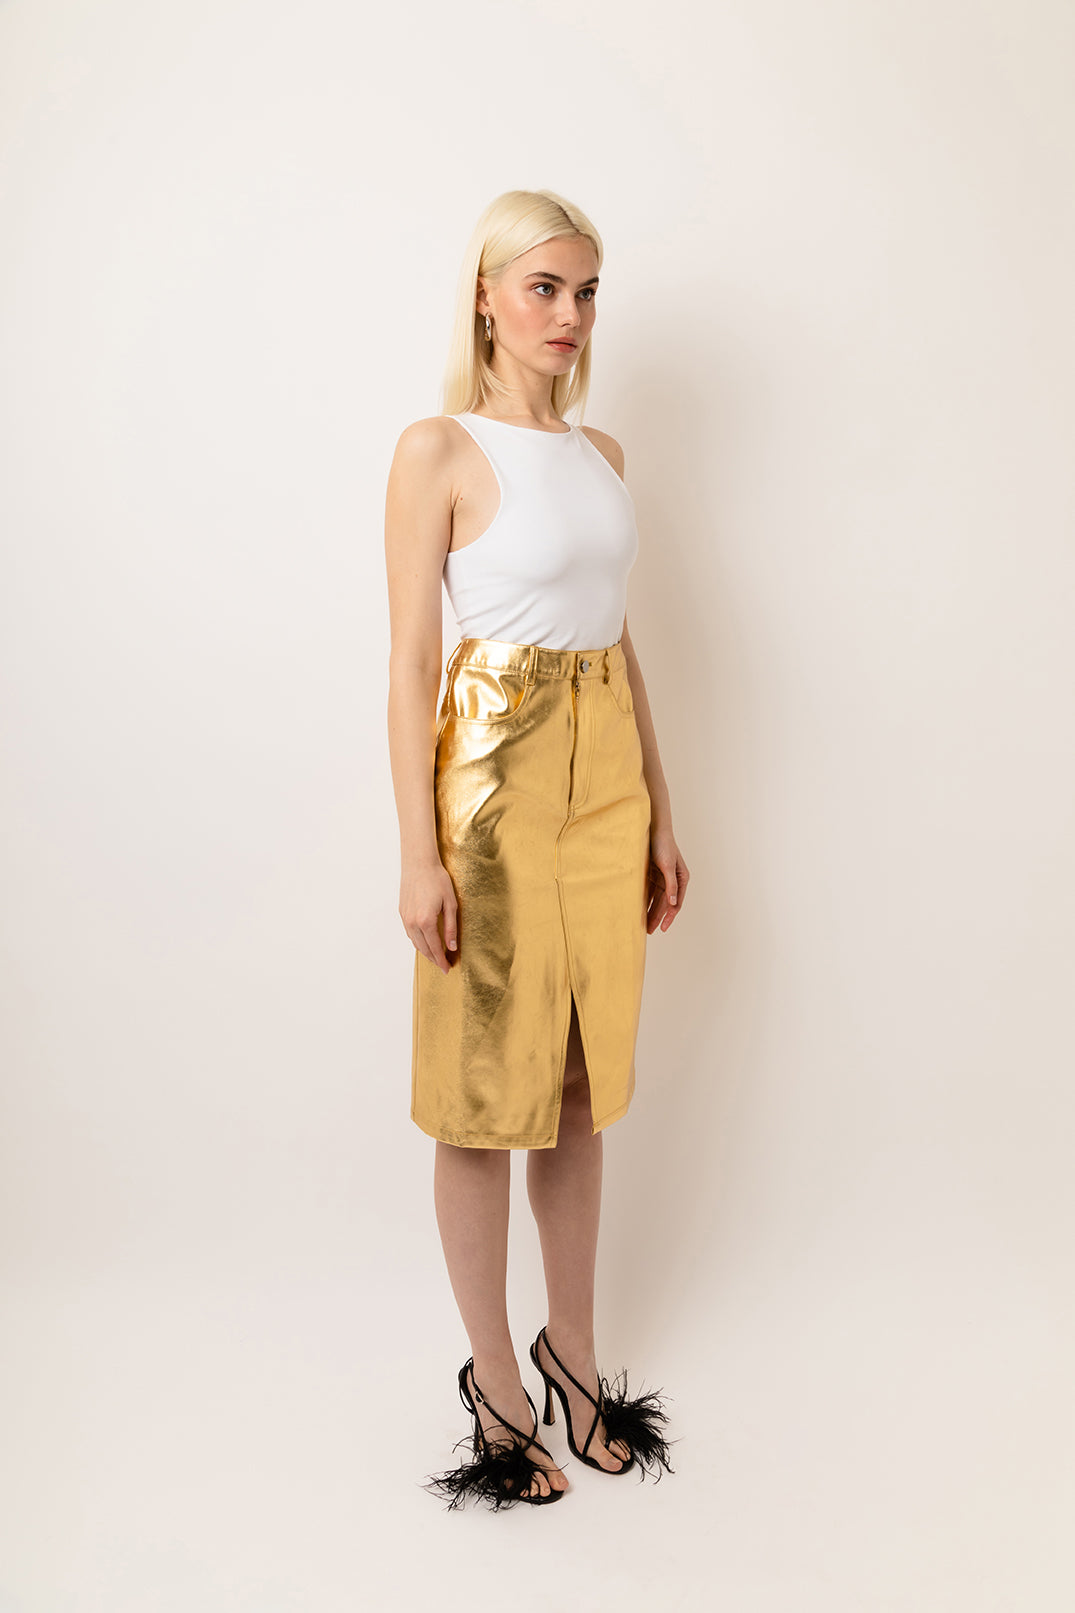 Lupe Shiny Gold High Waisted Metallic Faux Leather Pencil Midi Skirt